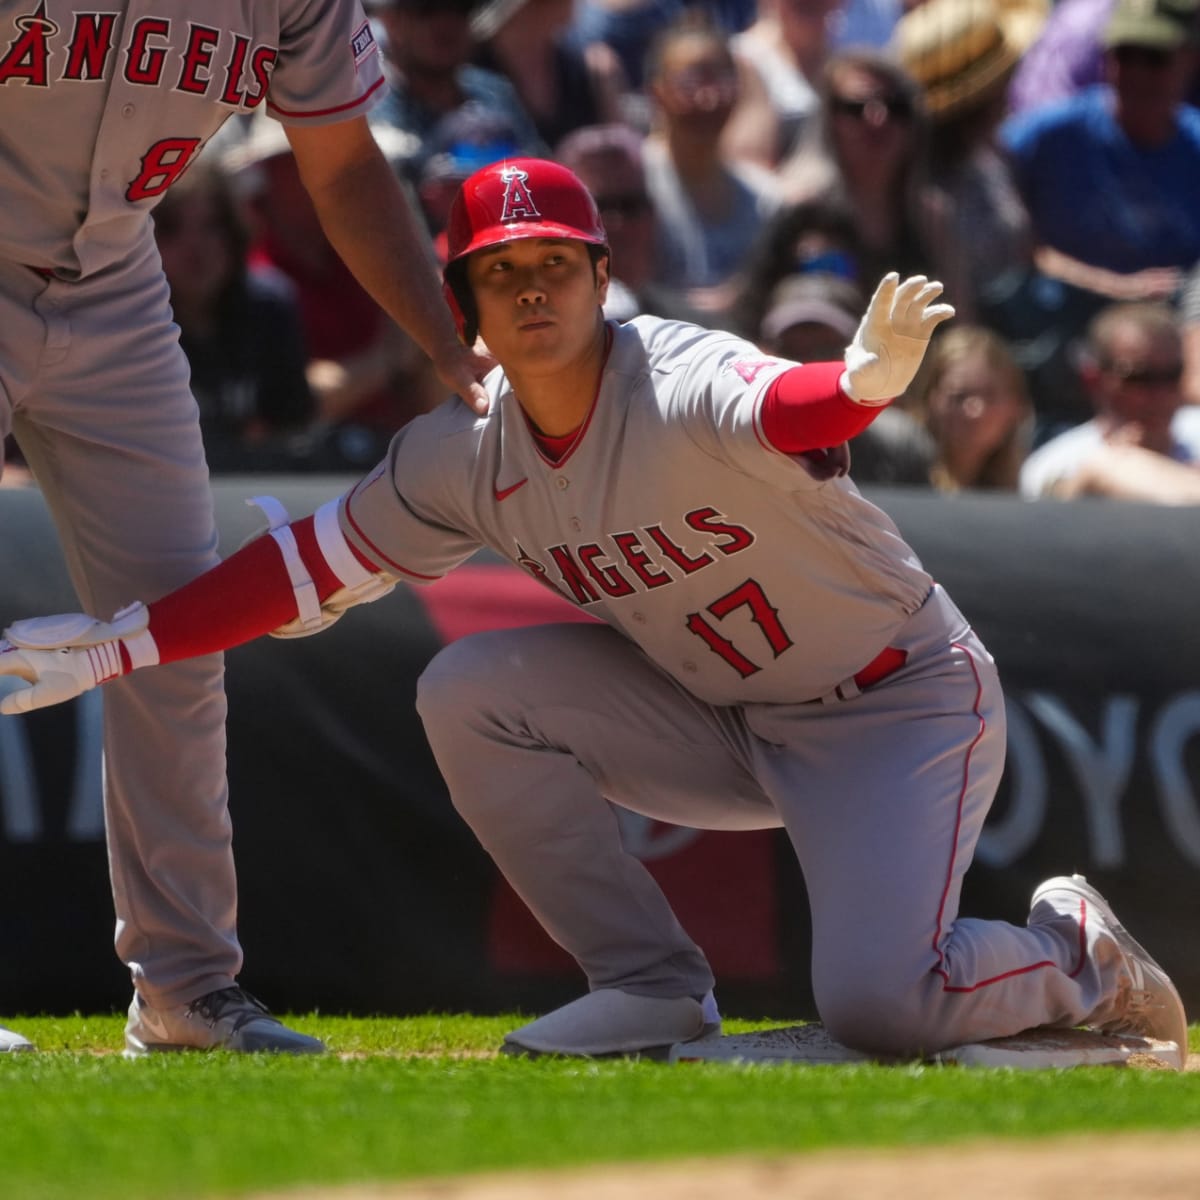 Angels News: Halos on Wrong Side of History Following Series Loss